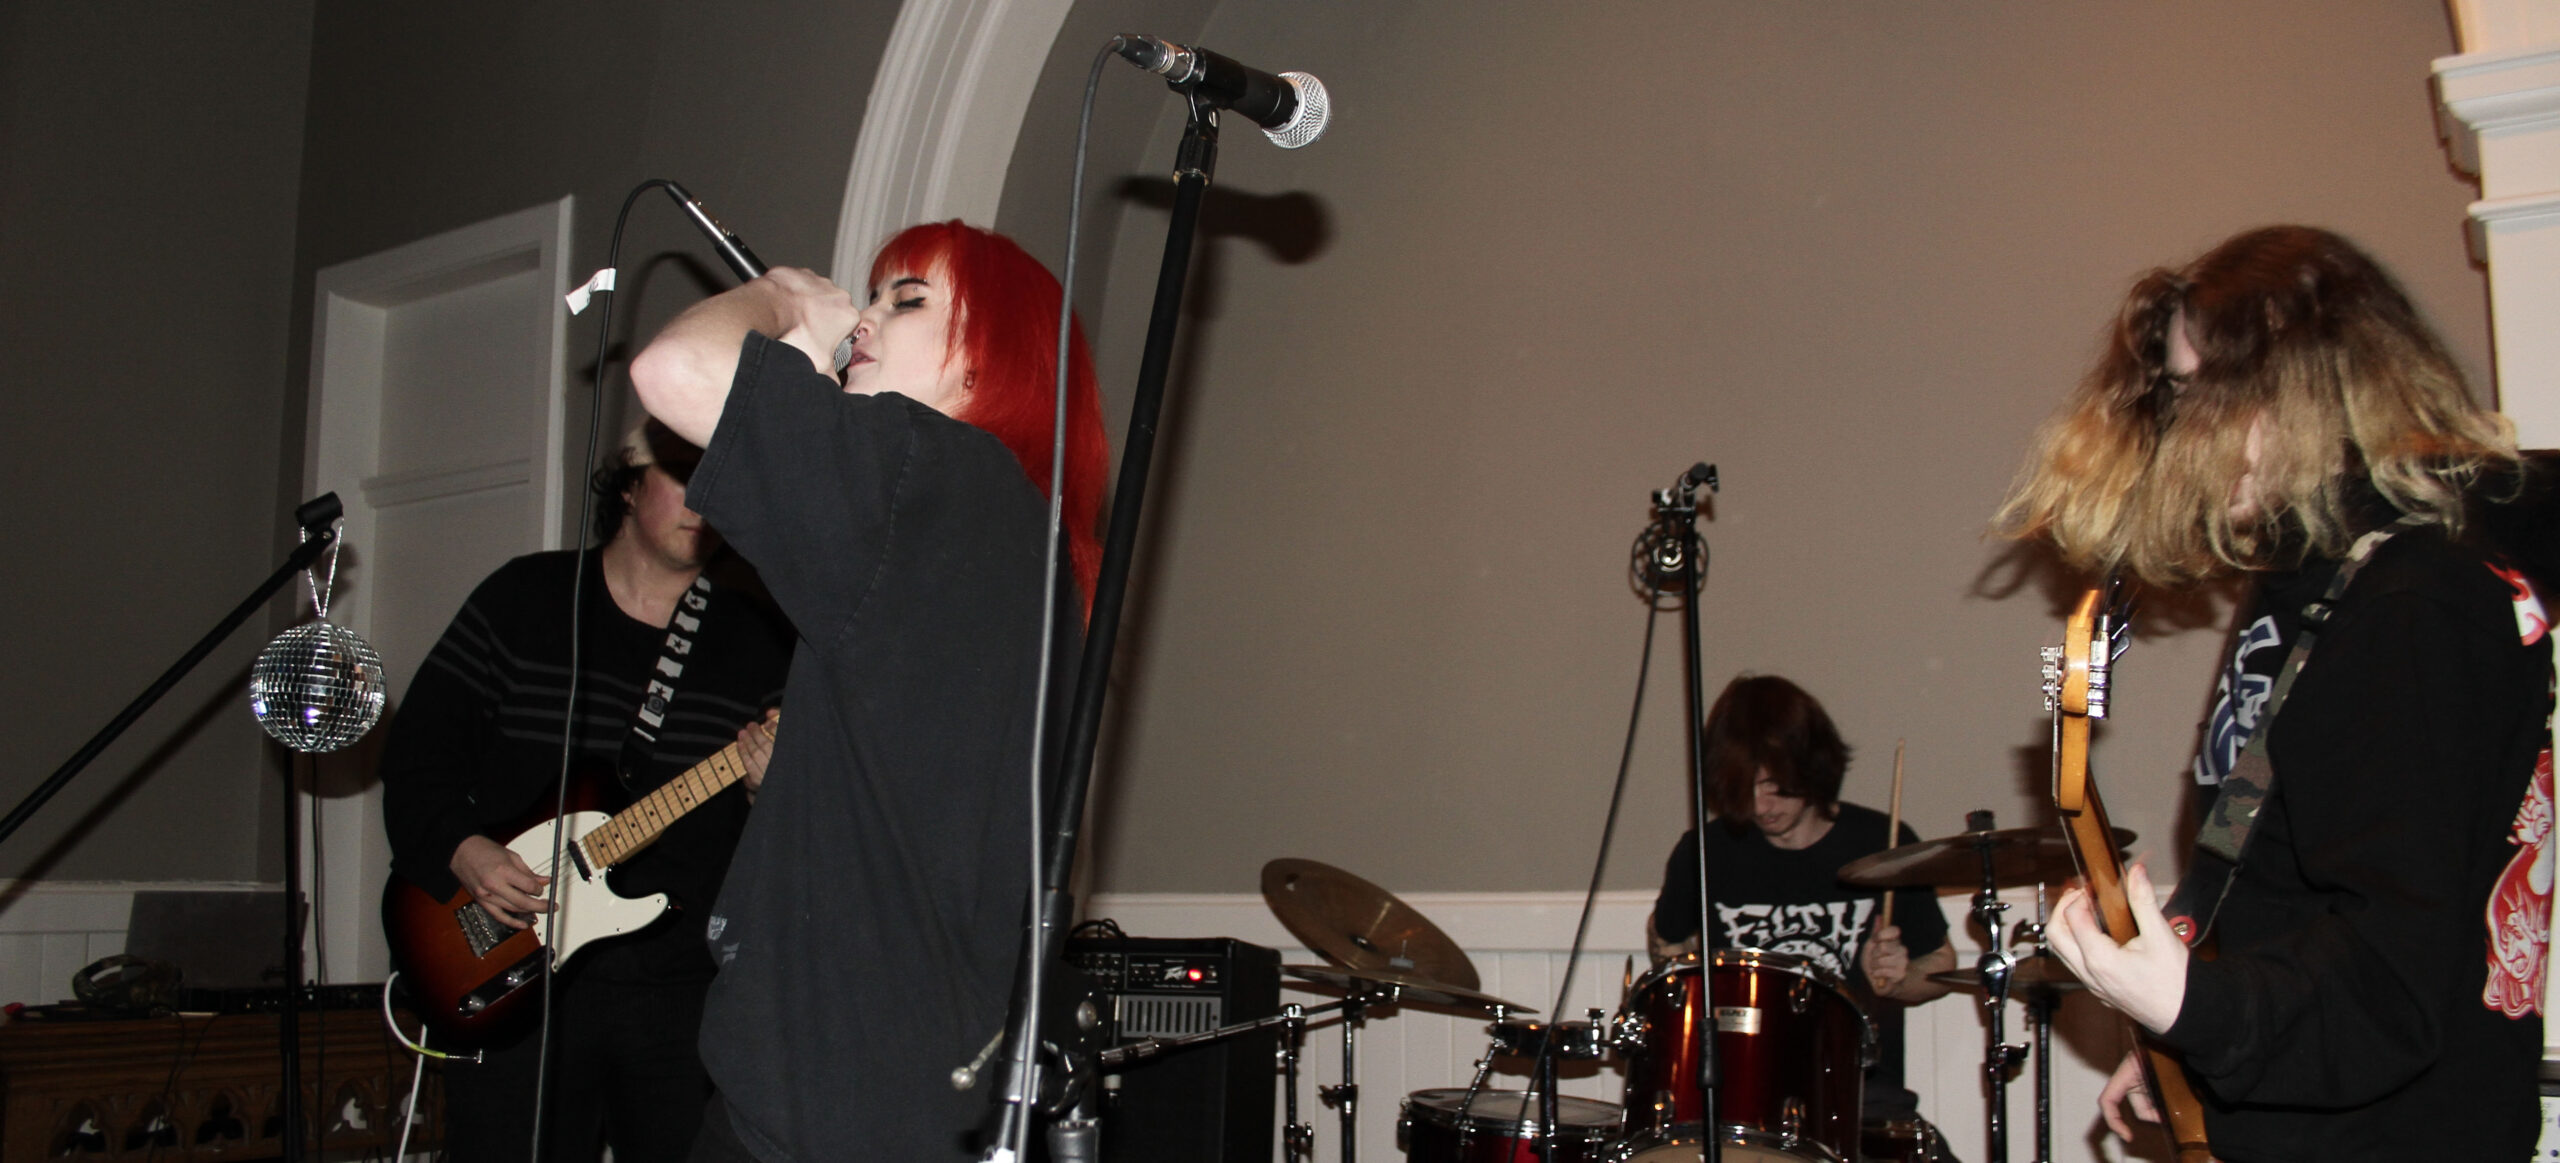 A punk rock bands performs in the Gower Street United Church. The wall is grey and there is a white arch in the middle of it. A silver microphone on a black stand is seen in the foreground. The singer yells into an upraised microphone. She has bright red hair. There are two guitarists, one of which, who is standing on the right, has his blonde hair covering his face. There is a man sitting at a drum kit behind the other three band members.